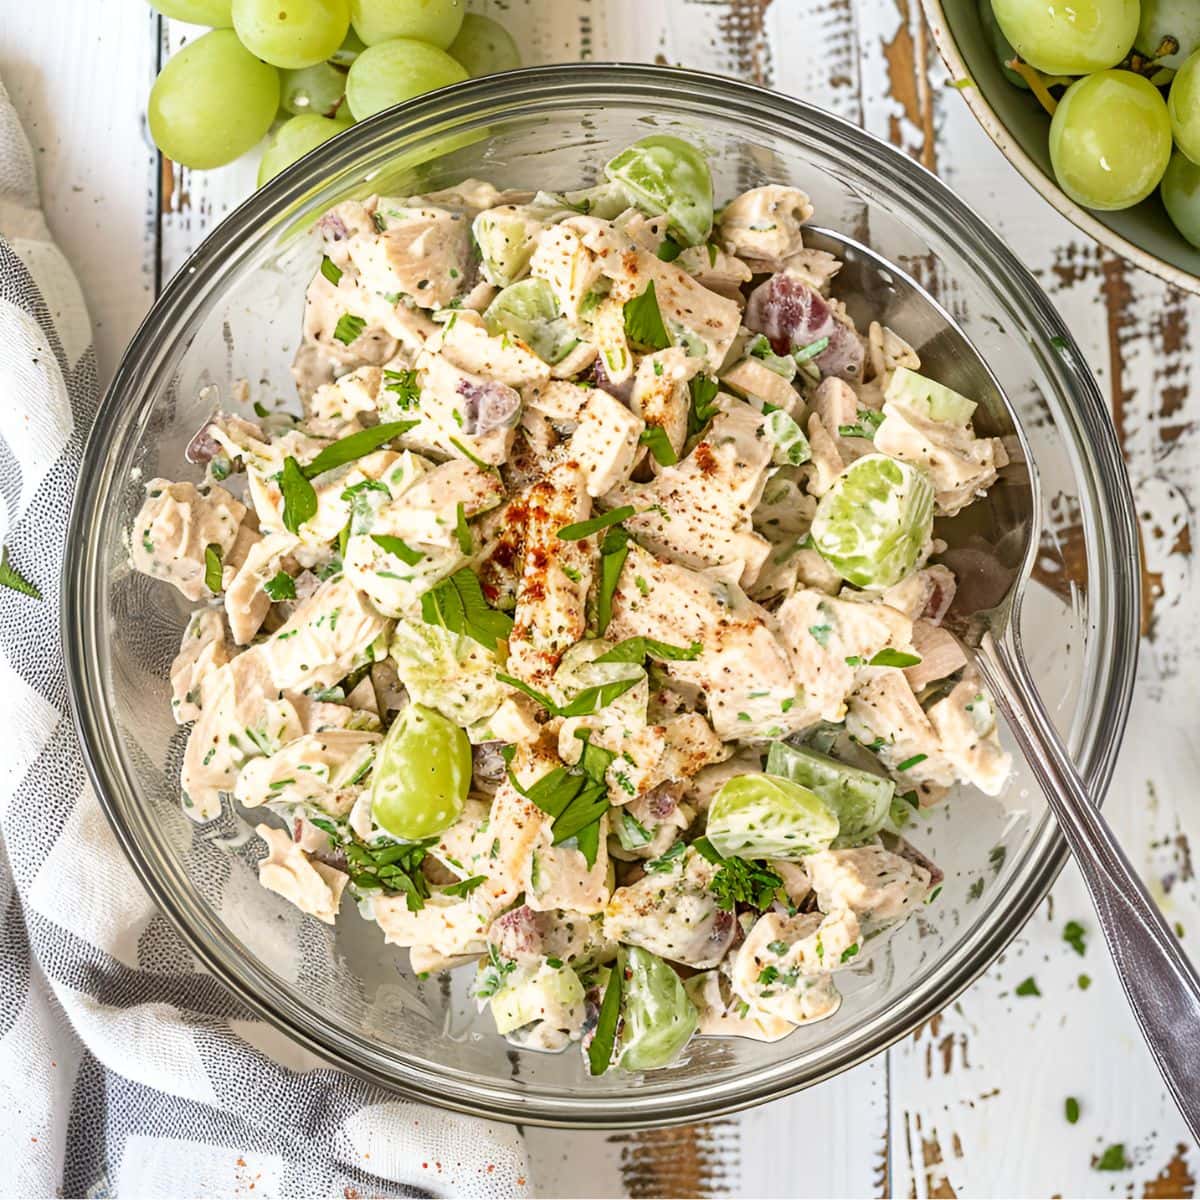 Top View of Ina Garten's Chicken Salad in a Glass bowl with Herbs and Seasonings